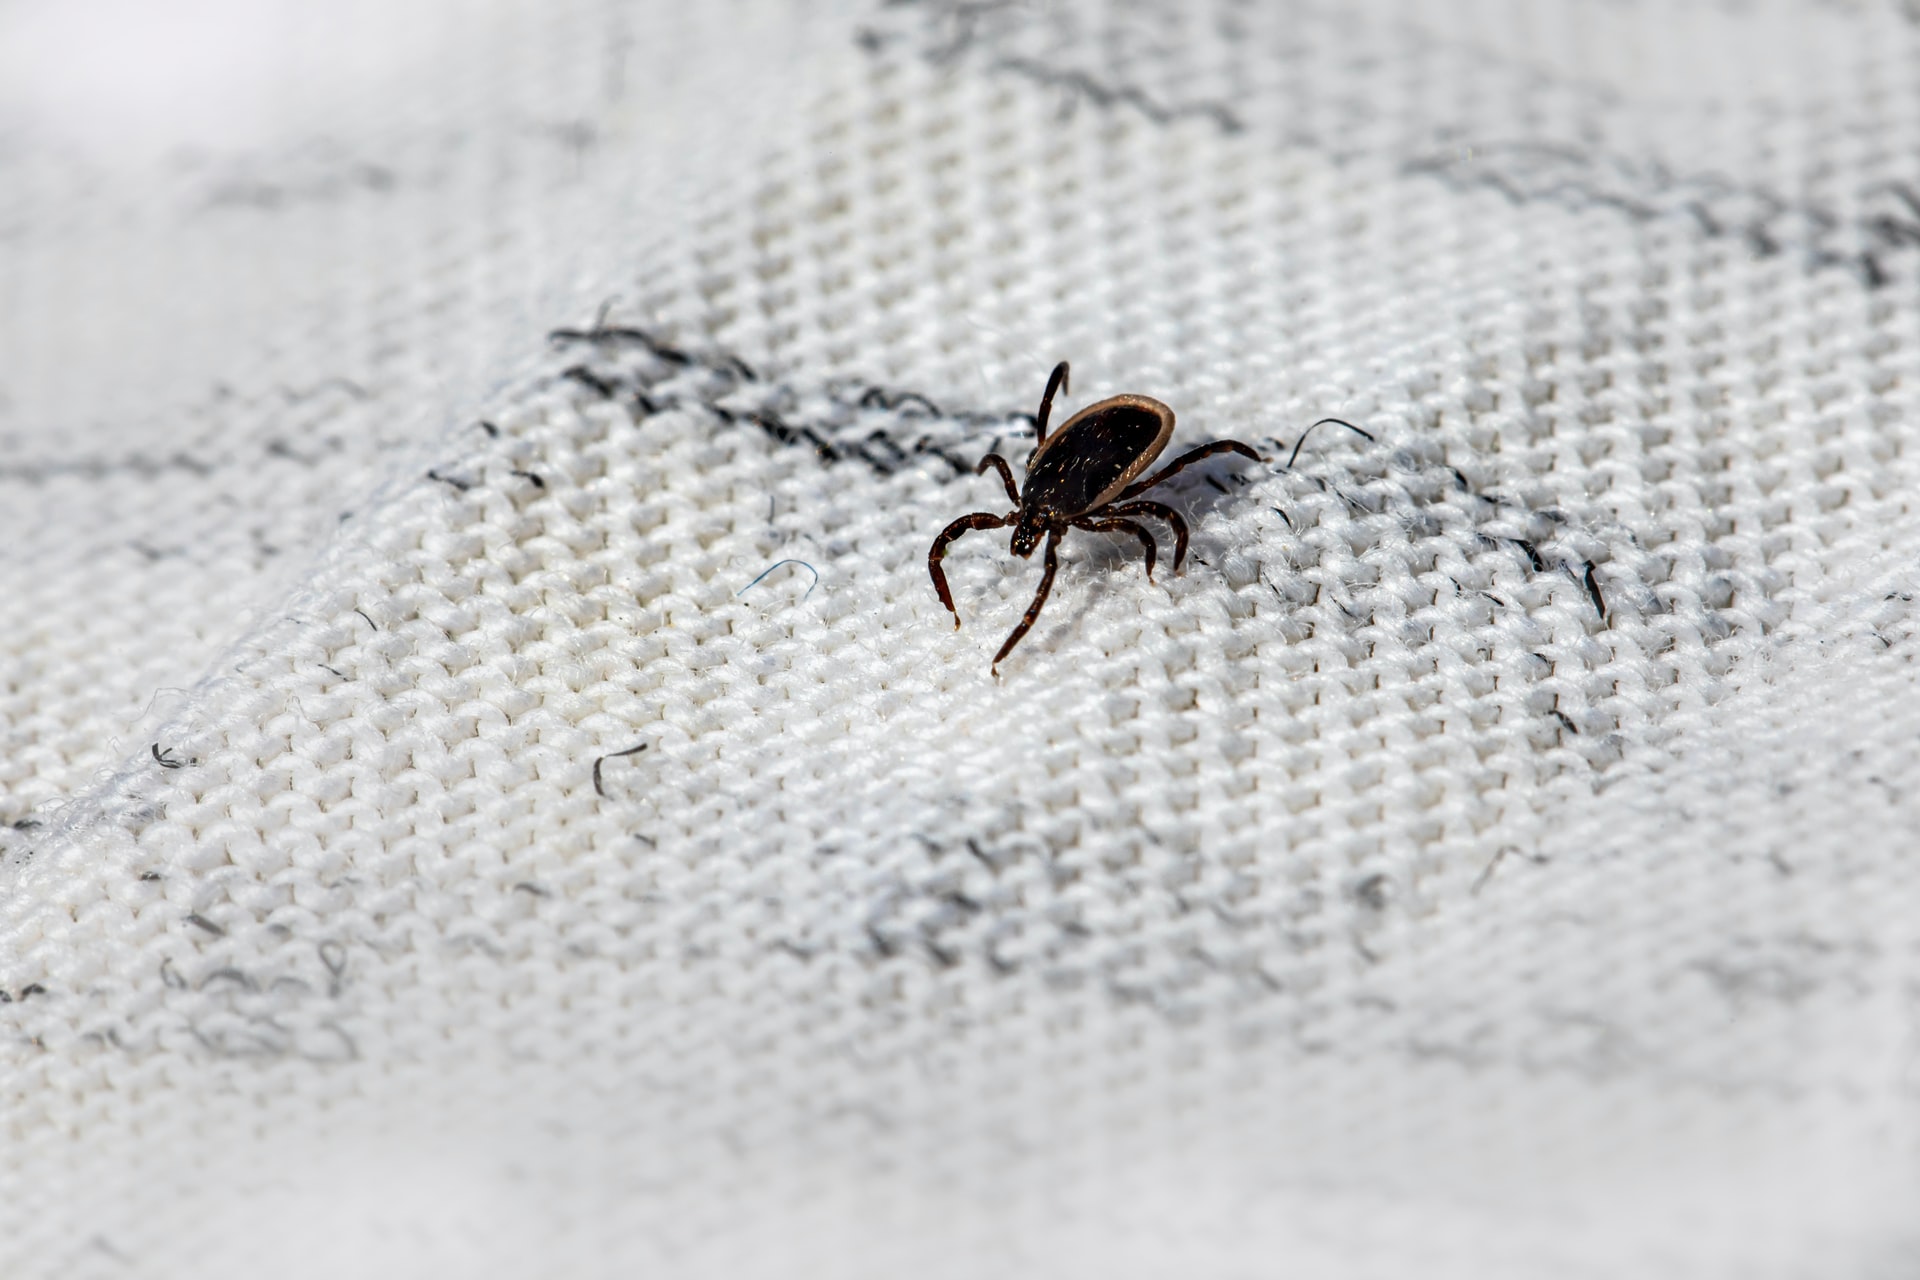 Can You Squish a Tick or Is It Dangerous? - MyGreenTent.com